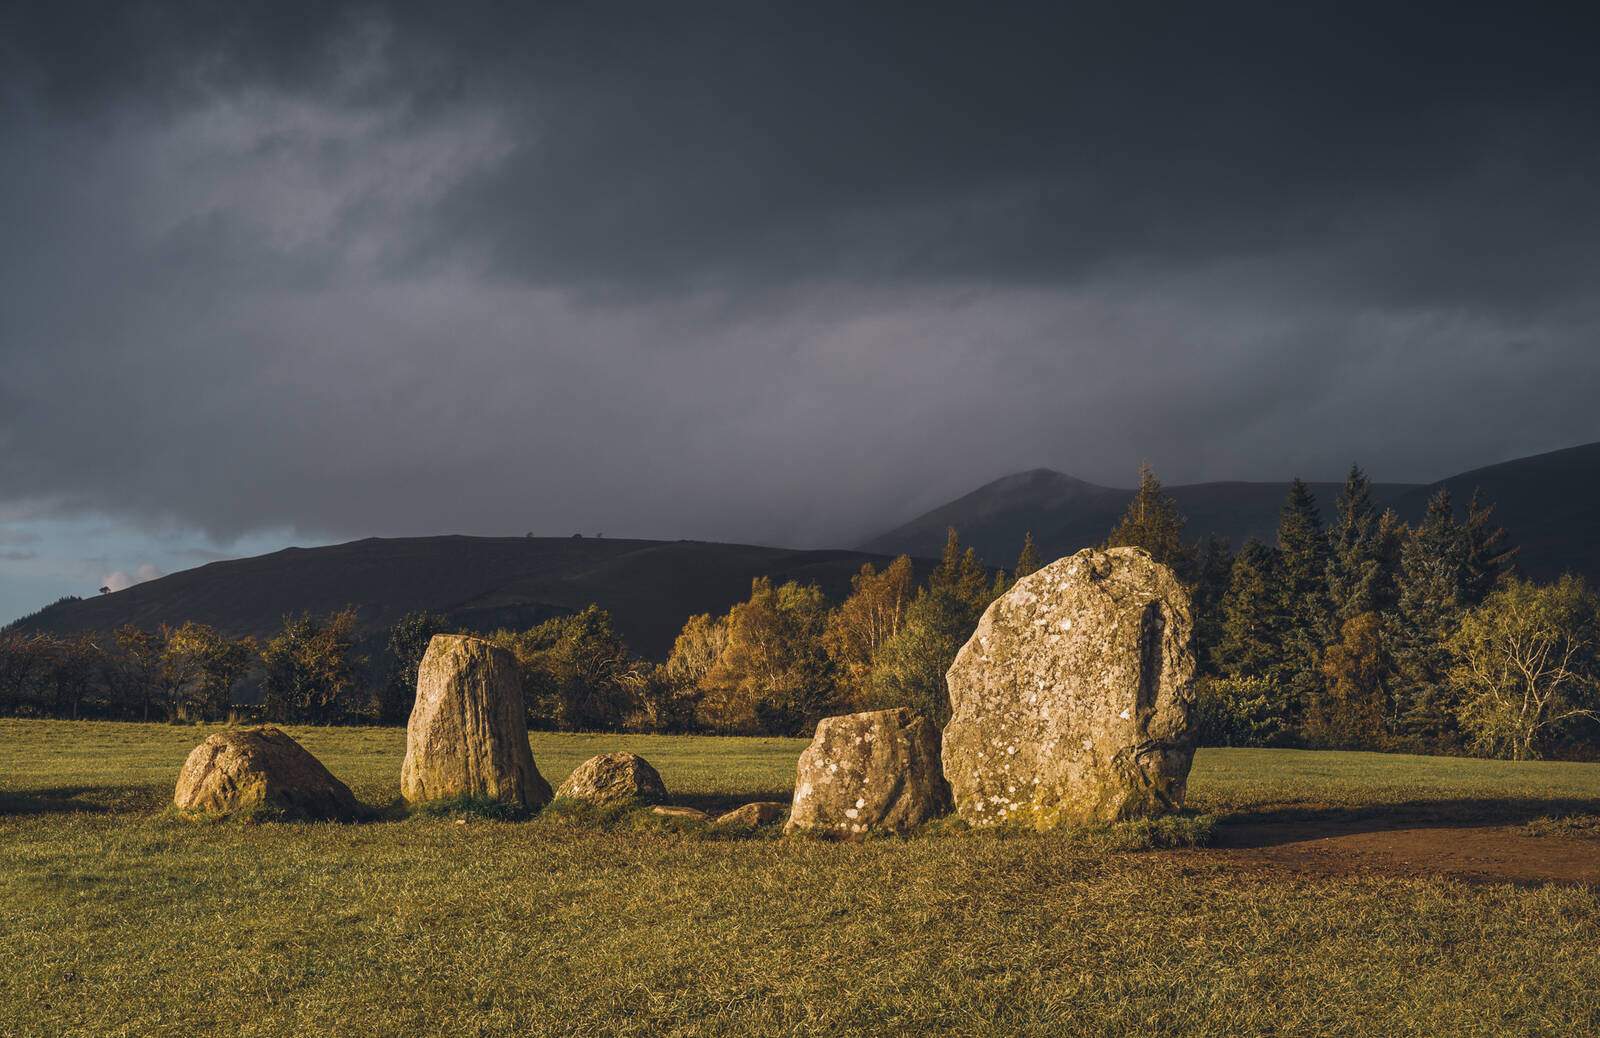 Image of Castlerigg Stone Circle by James Billings.